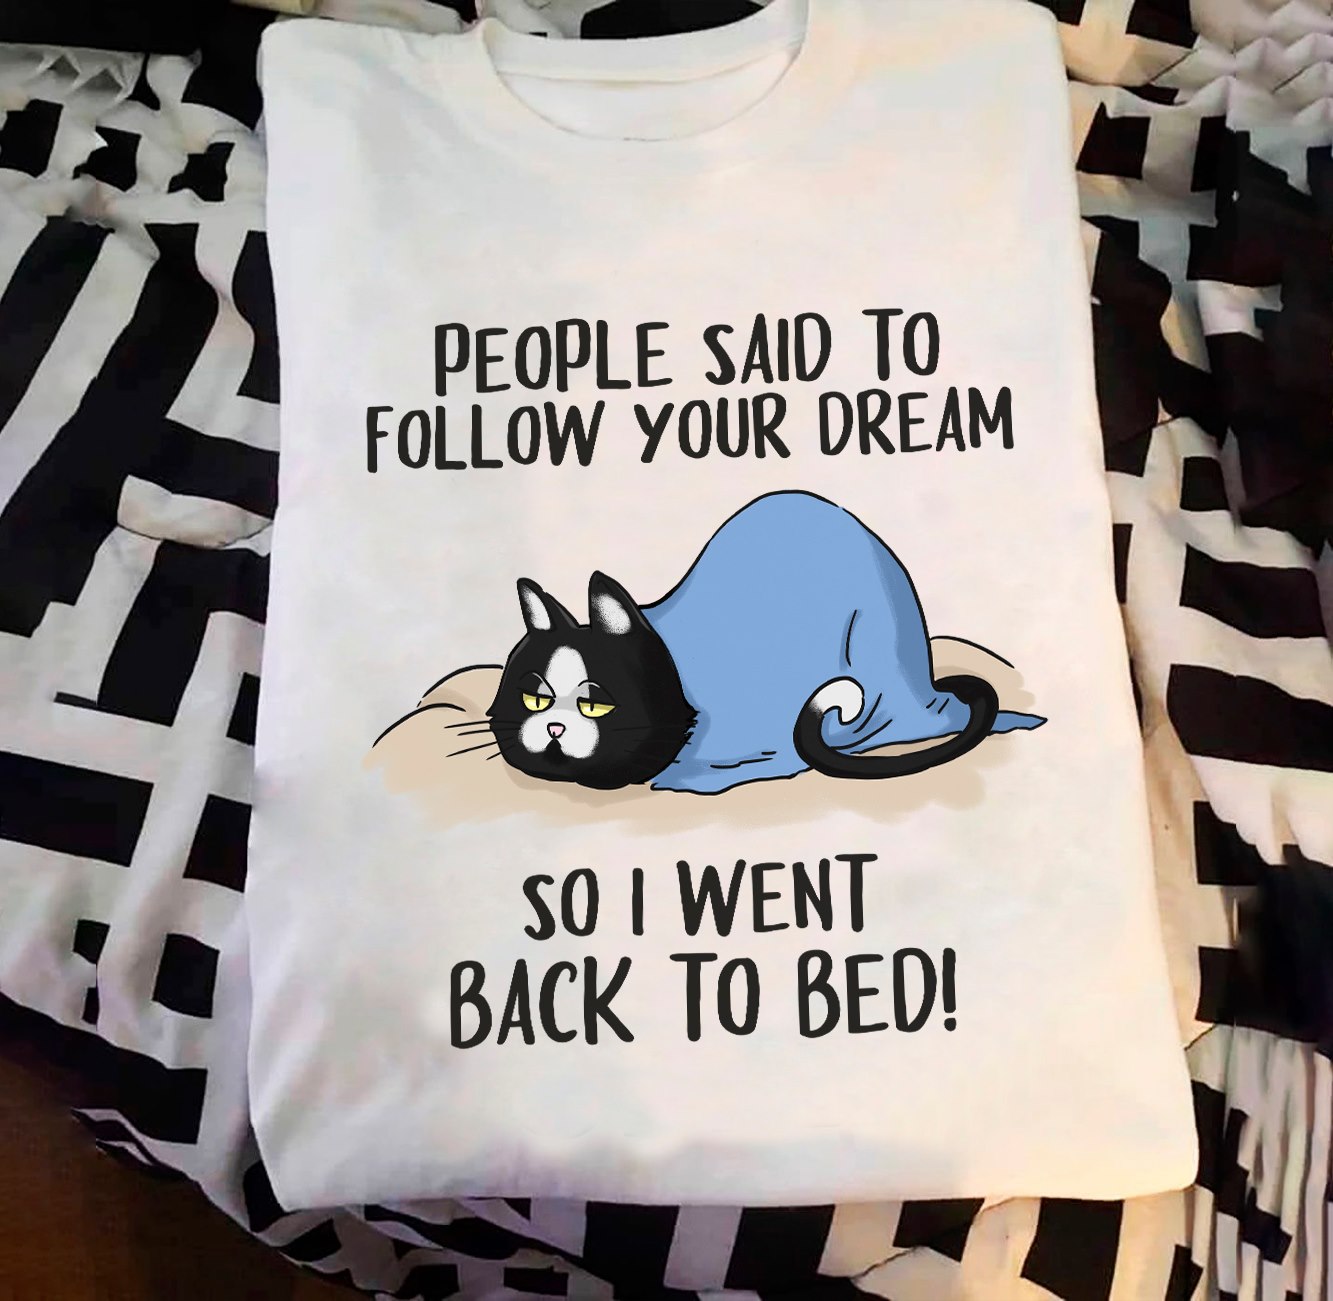 People said to follow your dream so I went back to bed – Sleepy cat